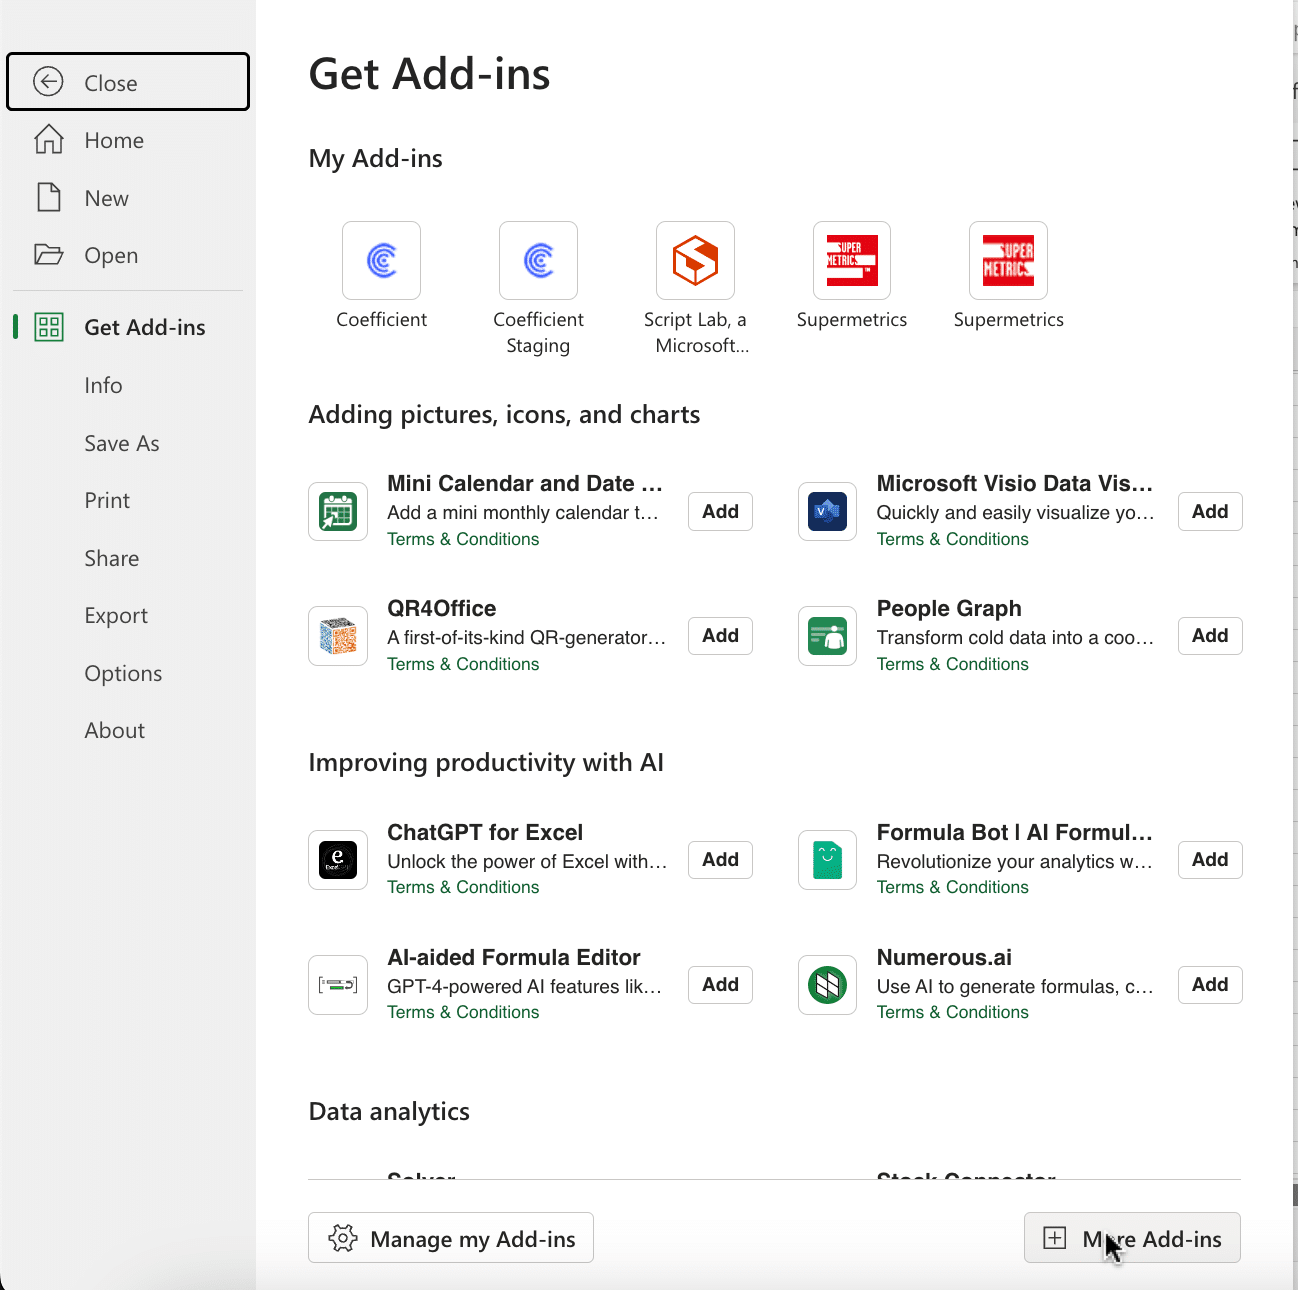 Opening Excel from the desktop or Office Online and navigating to ‘File’ > ‘Get Add-ins.’